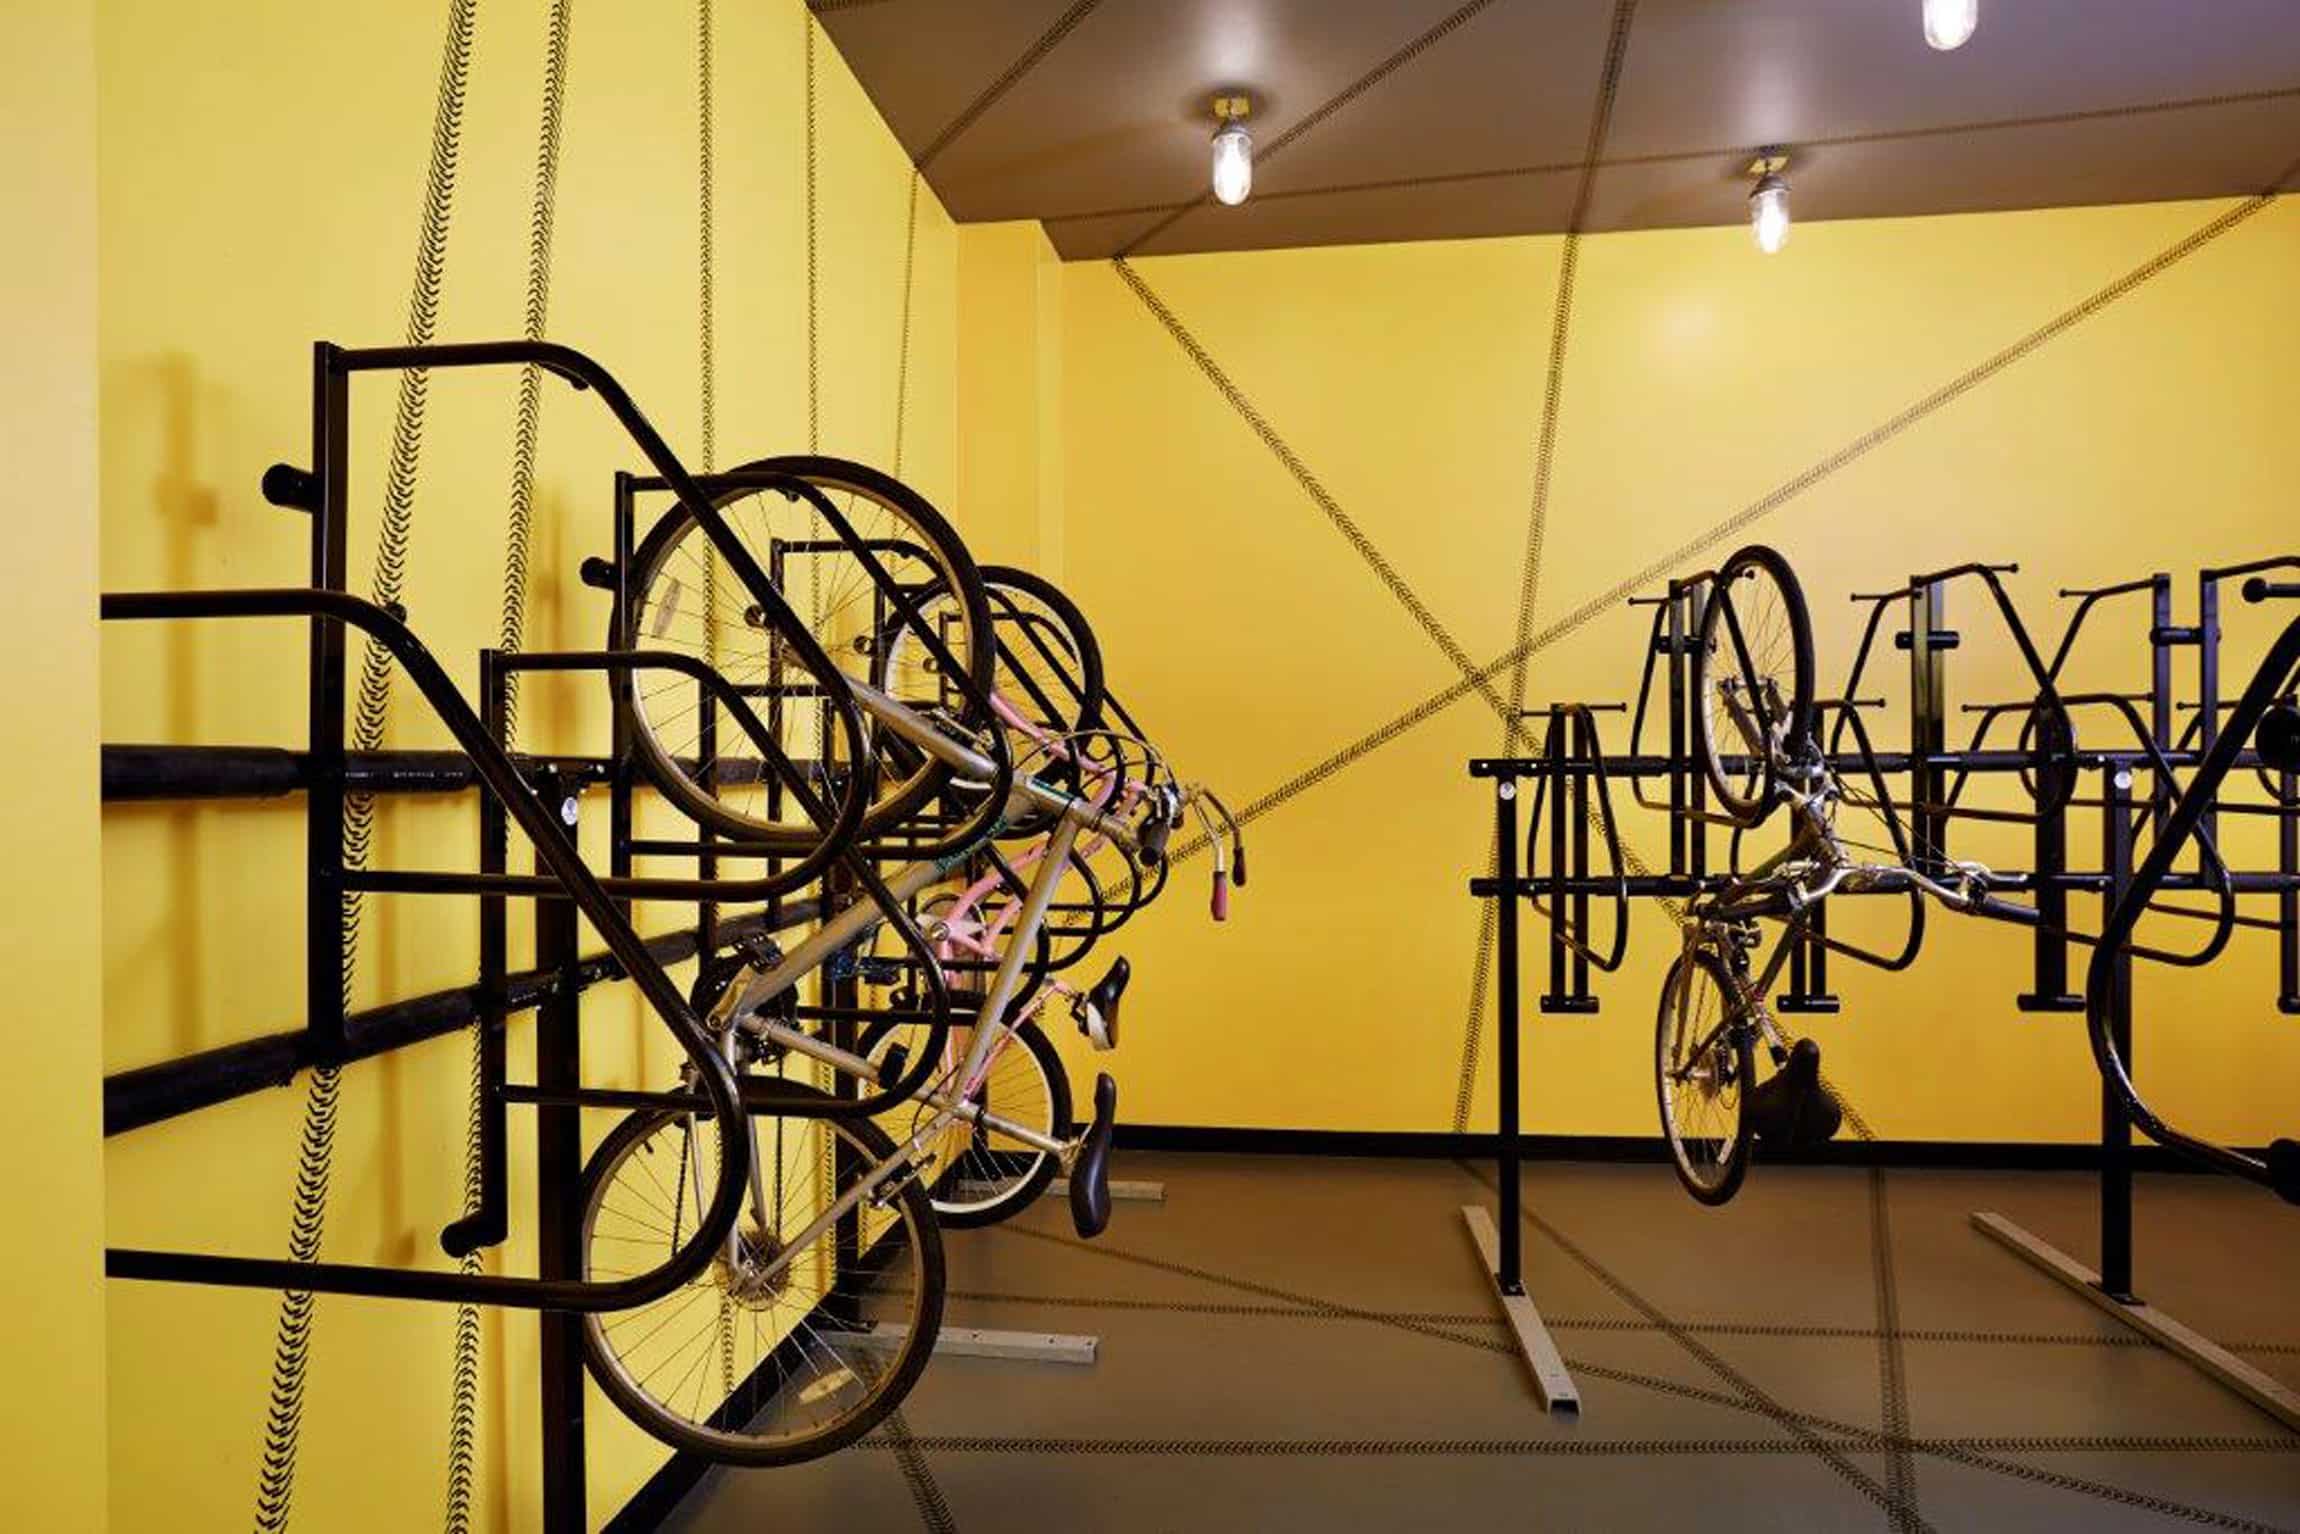 Bike rack room with yellow walls and bikes hanging up